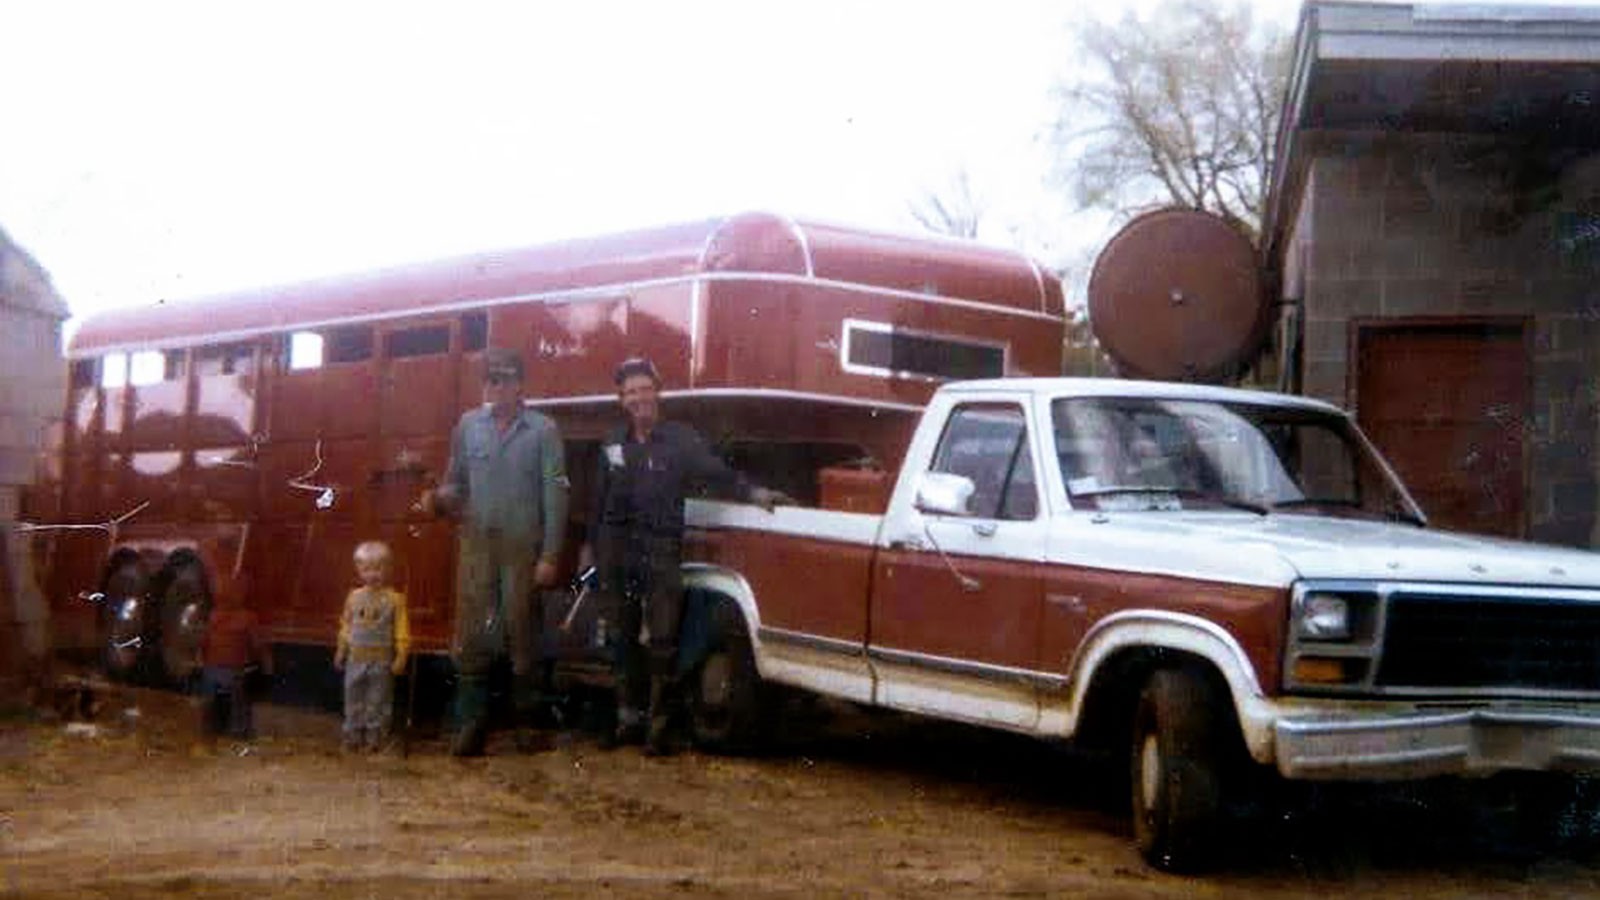 A very young Earl learning to work the family farm with his father and grandfather.